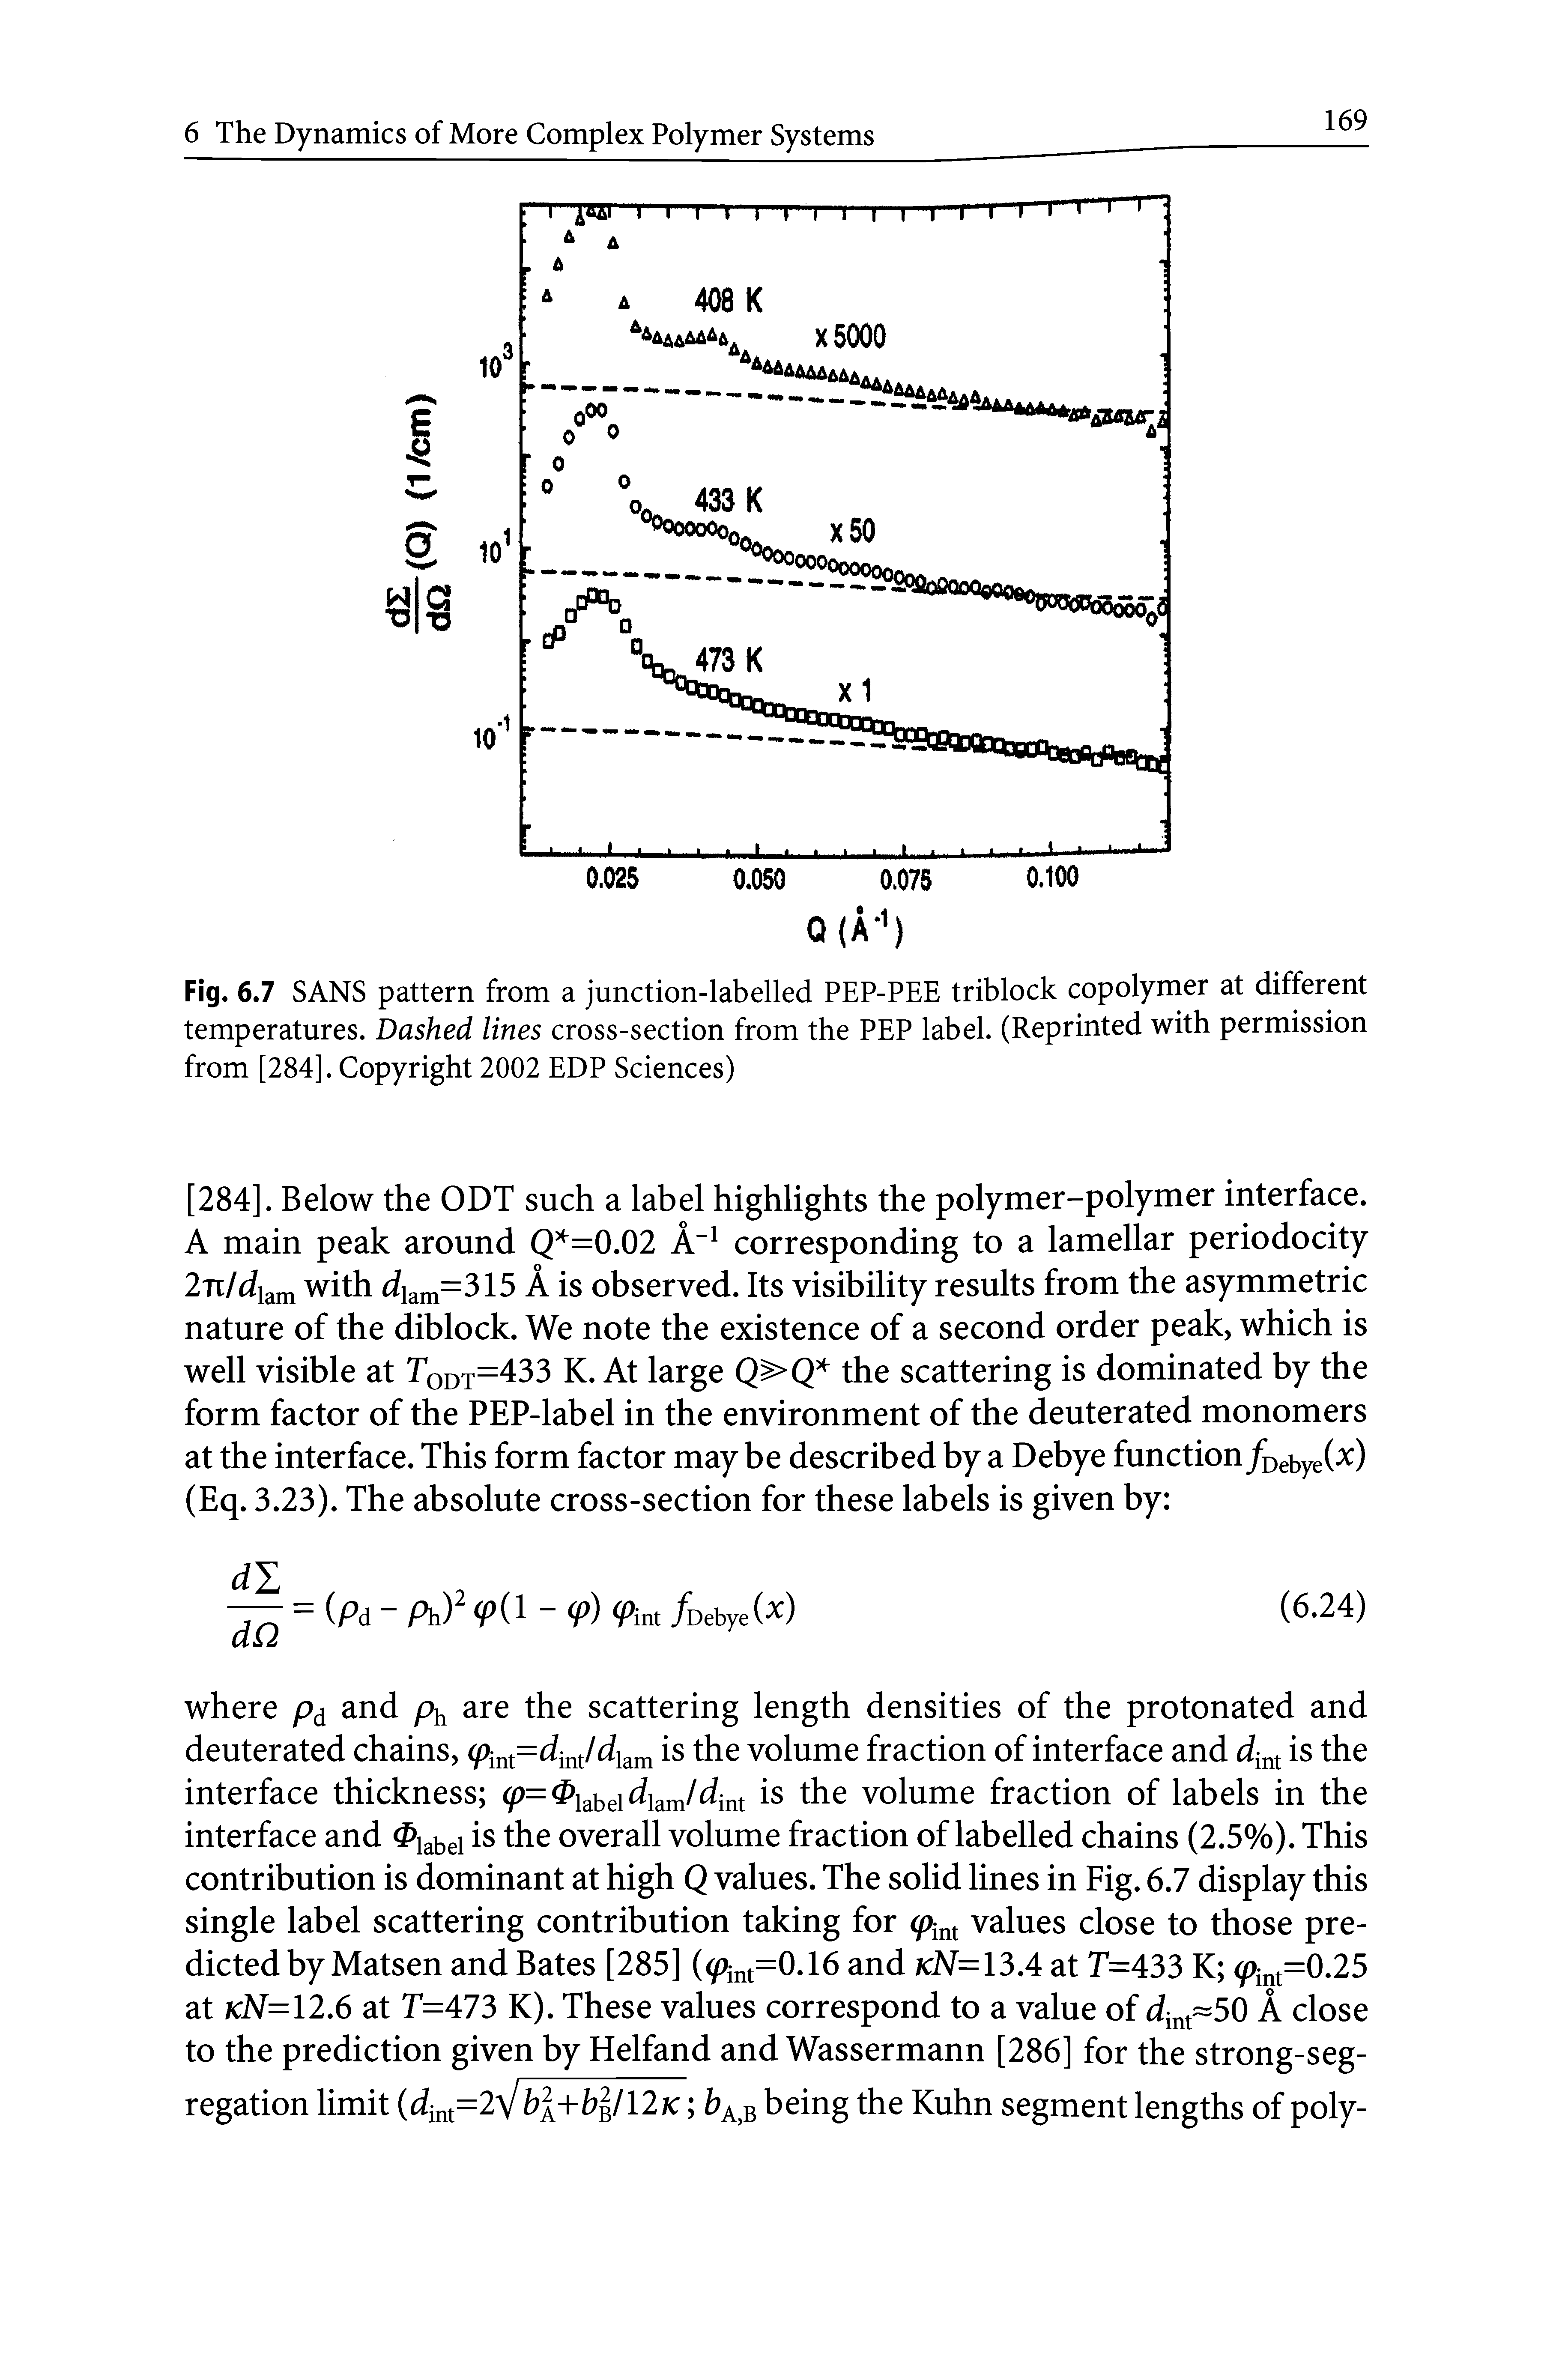 Fig. 6.7 SANS pattern from a junction-labelled PEP-PEE triblock copolymer at different temperatures. Dashed lines cross-section from the PEP label. (Reprinted with permission from [284]. Copyright 2002 EDP Sciences)...